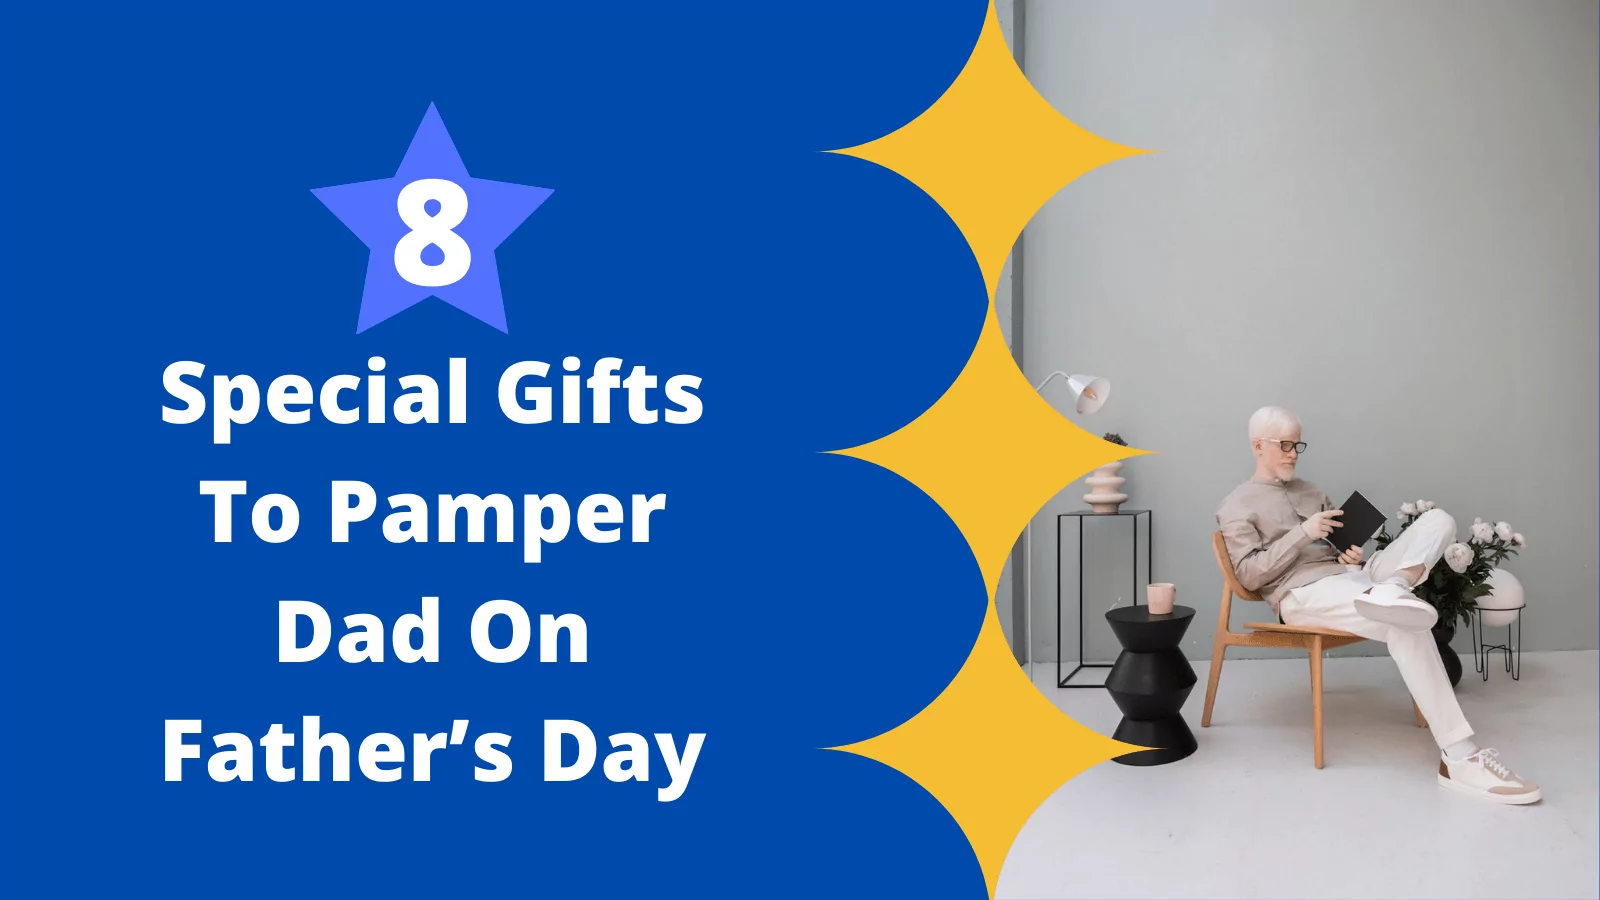 pamper dad on father's day